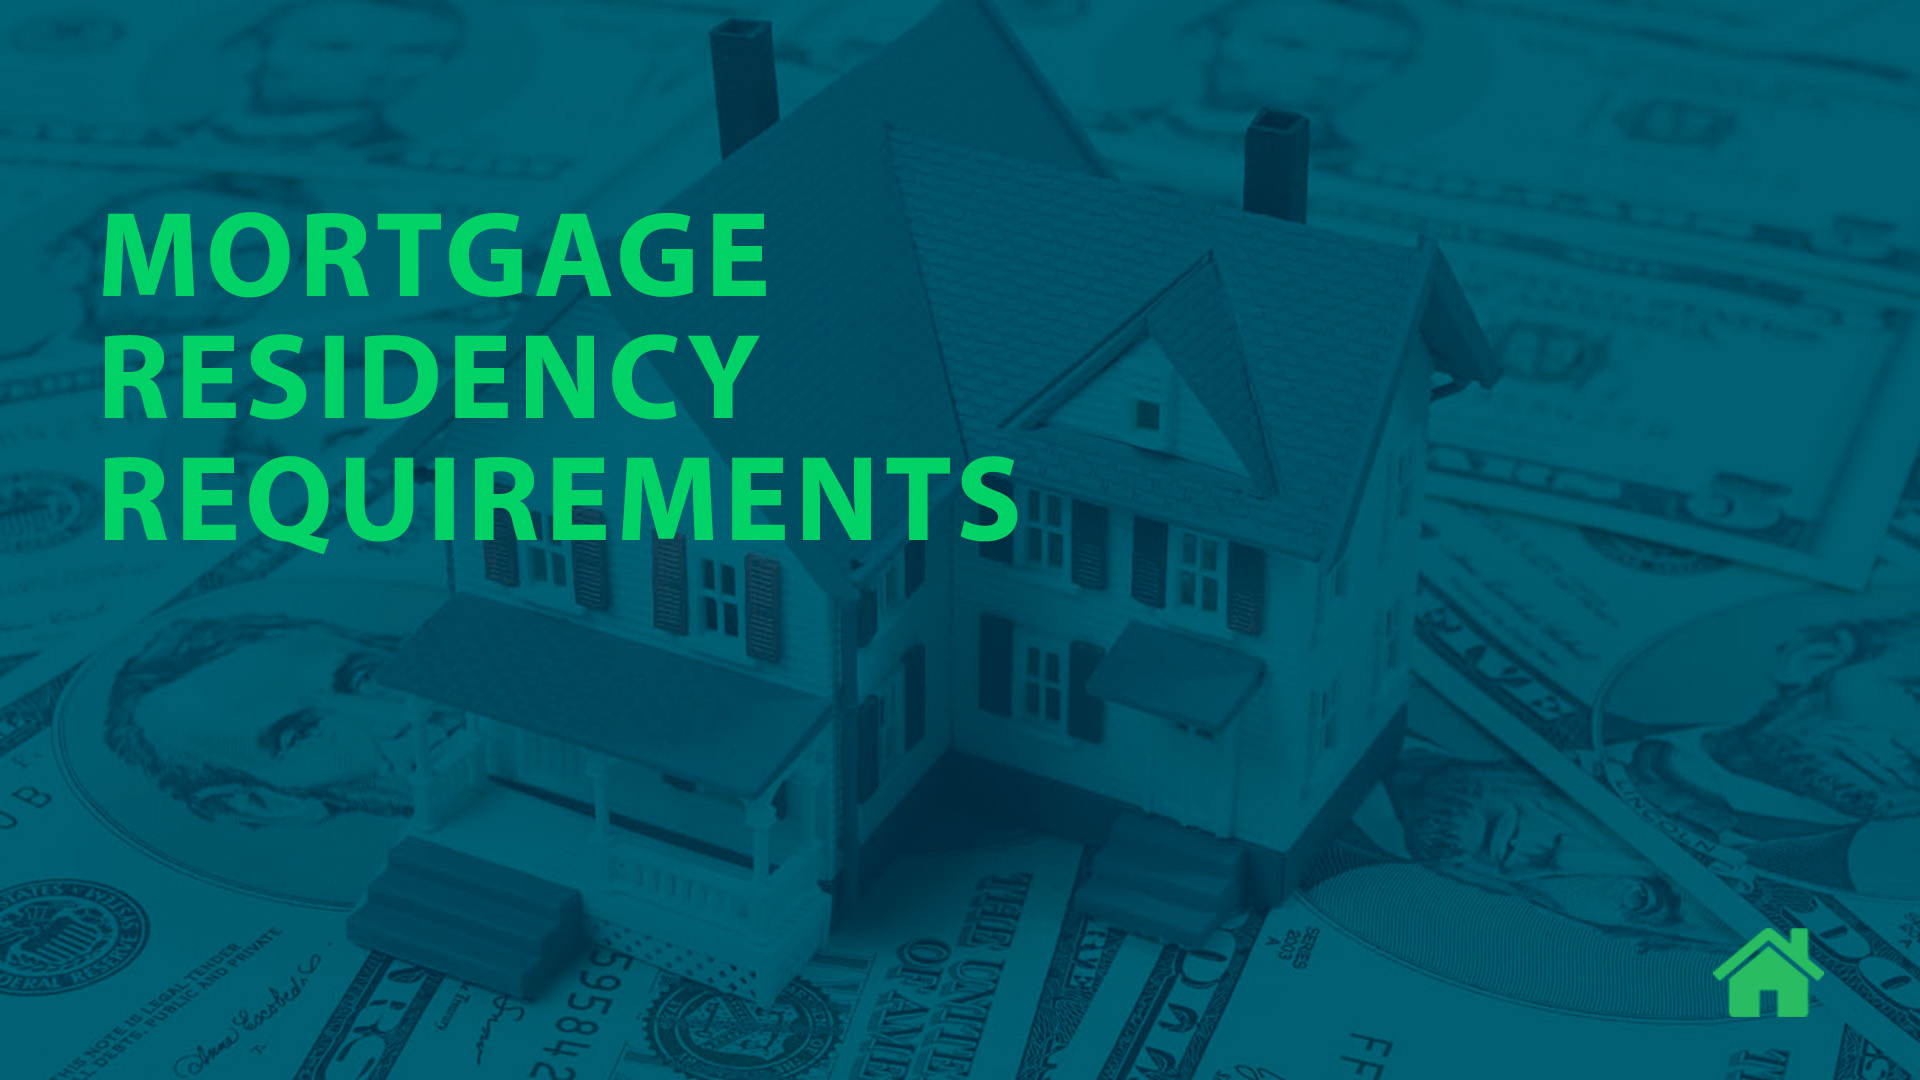 Mortgage residency requirements